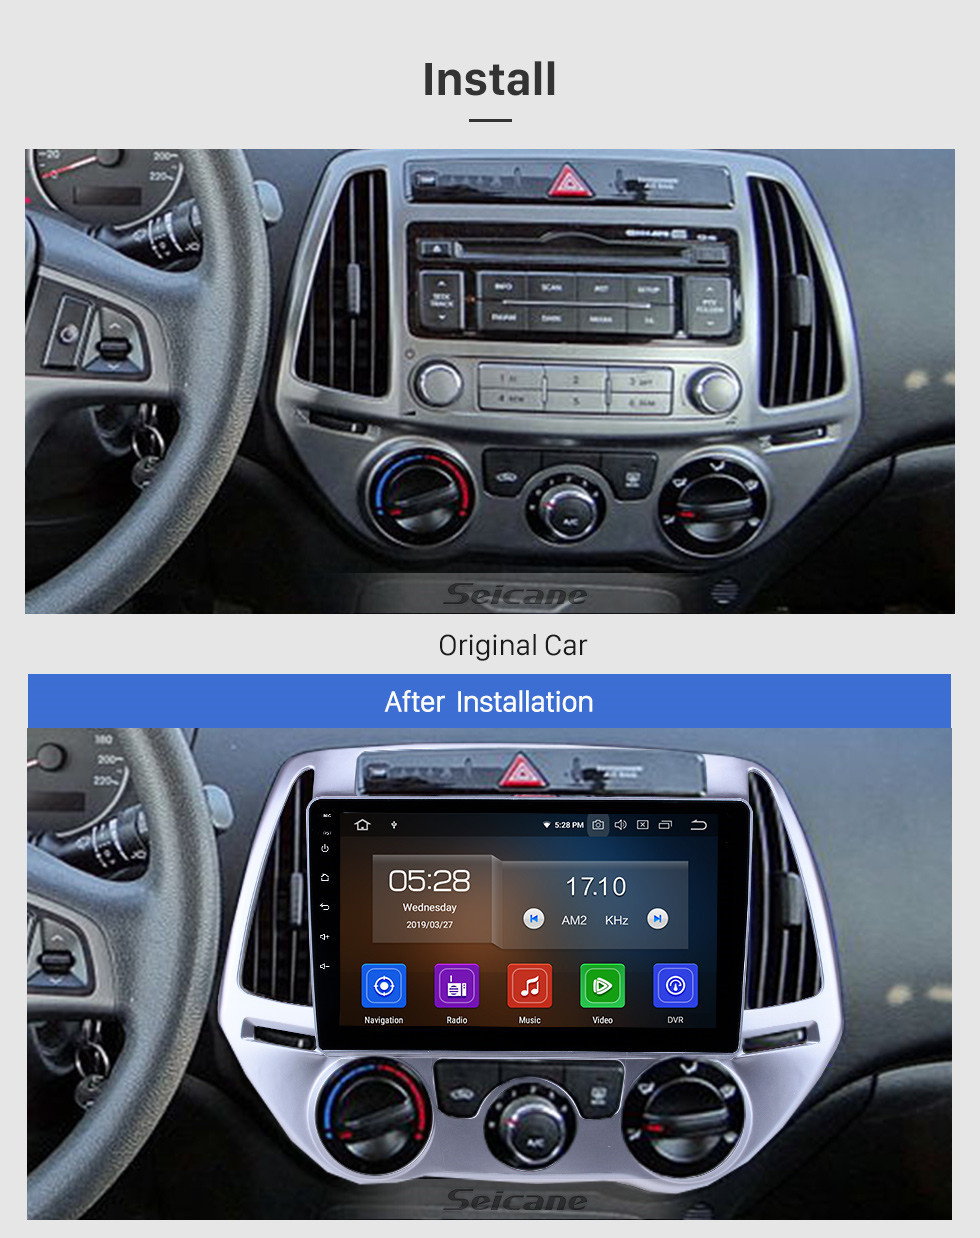 Seicane 9 inch Android 11.0 Radio for 2012-2014 Hyundai I20 Manual A/C Bluetooth Wifi HD Touchscreen GPS Navigation Carplay USB support DVR OBD2 Rearview camera